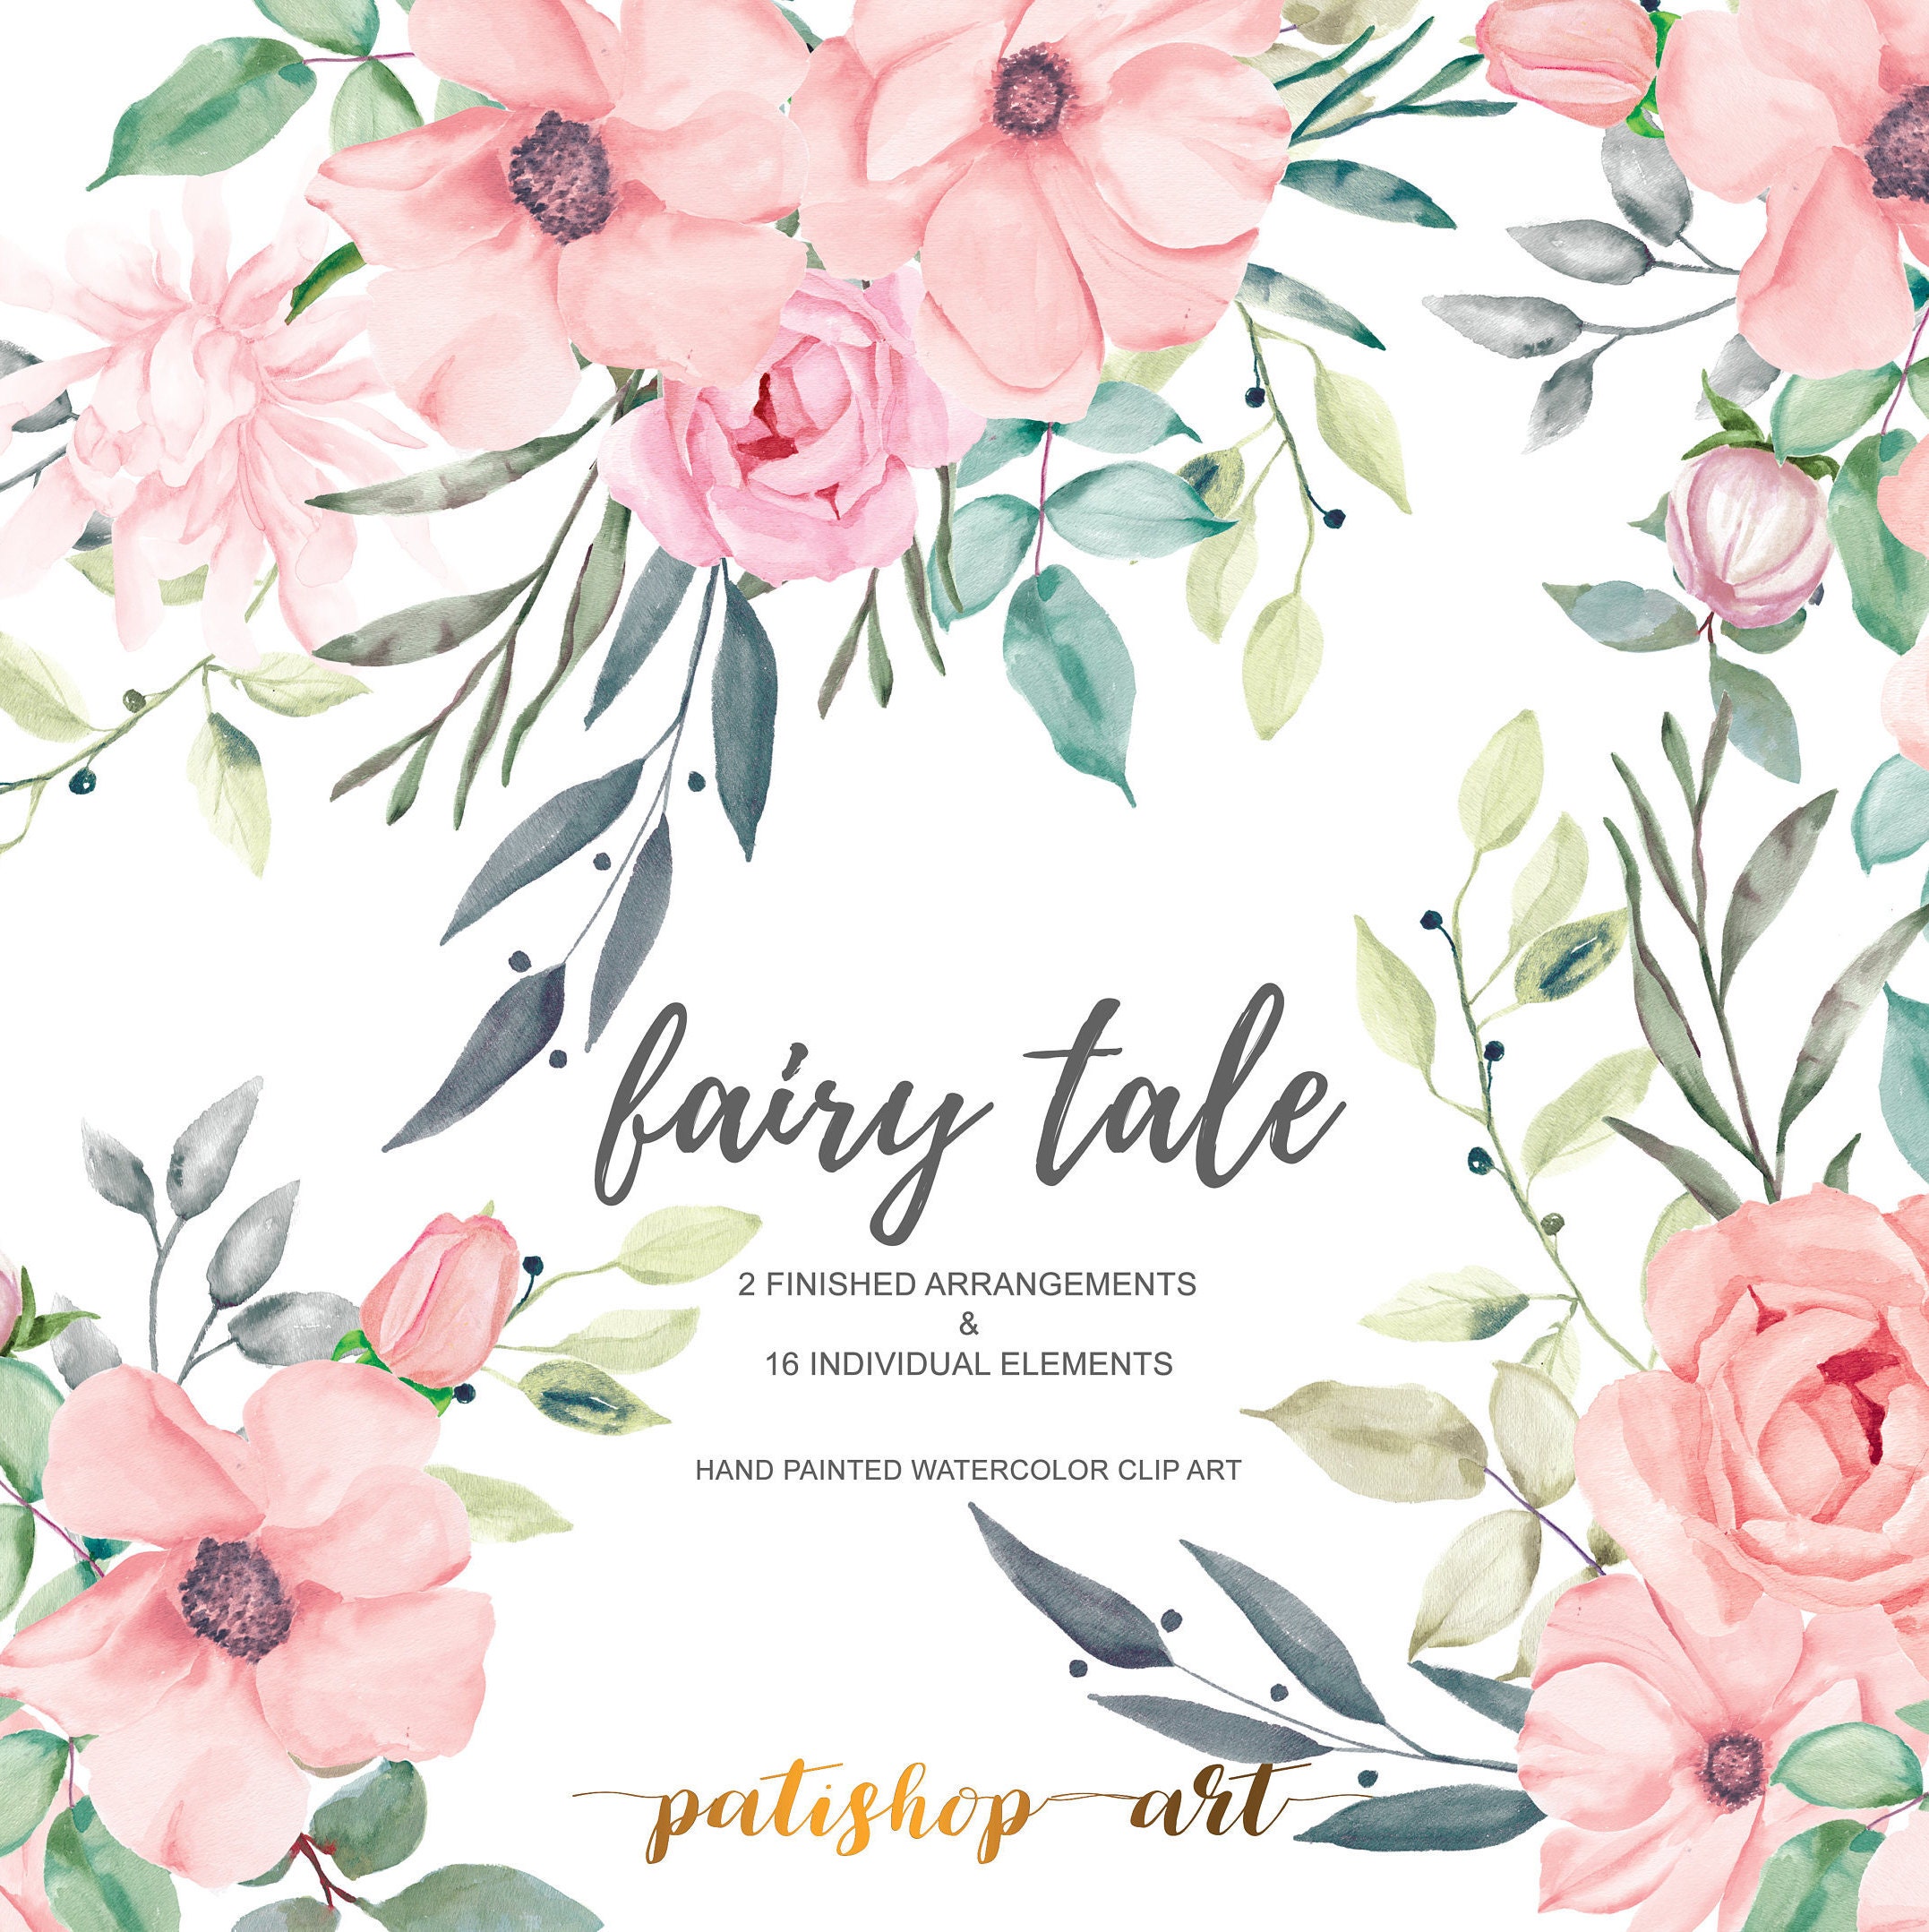 Download 50% OFF SALE Blush Watercolor Flowers & Leaves with Different